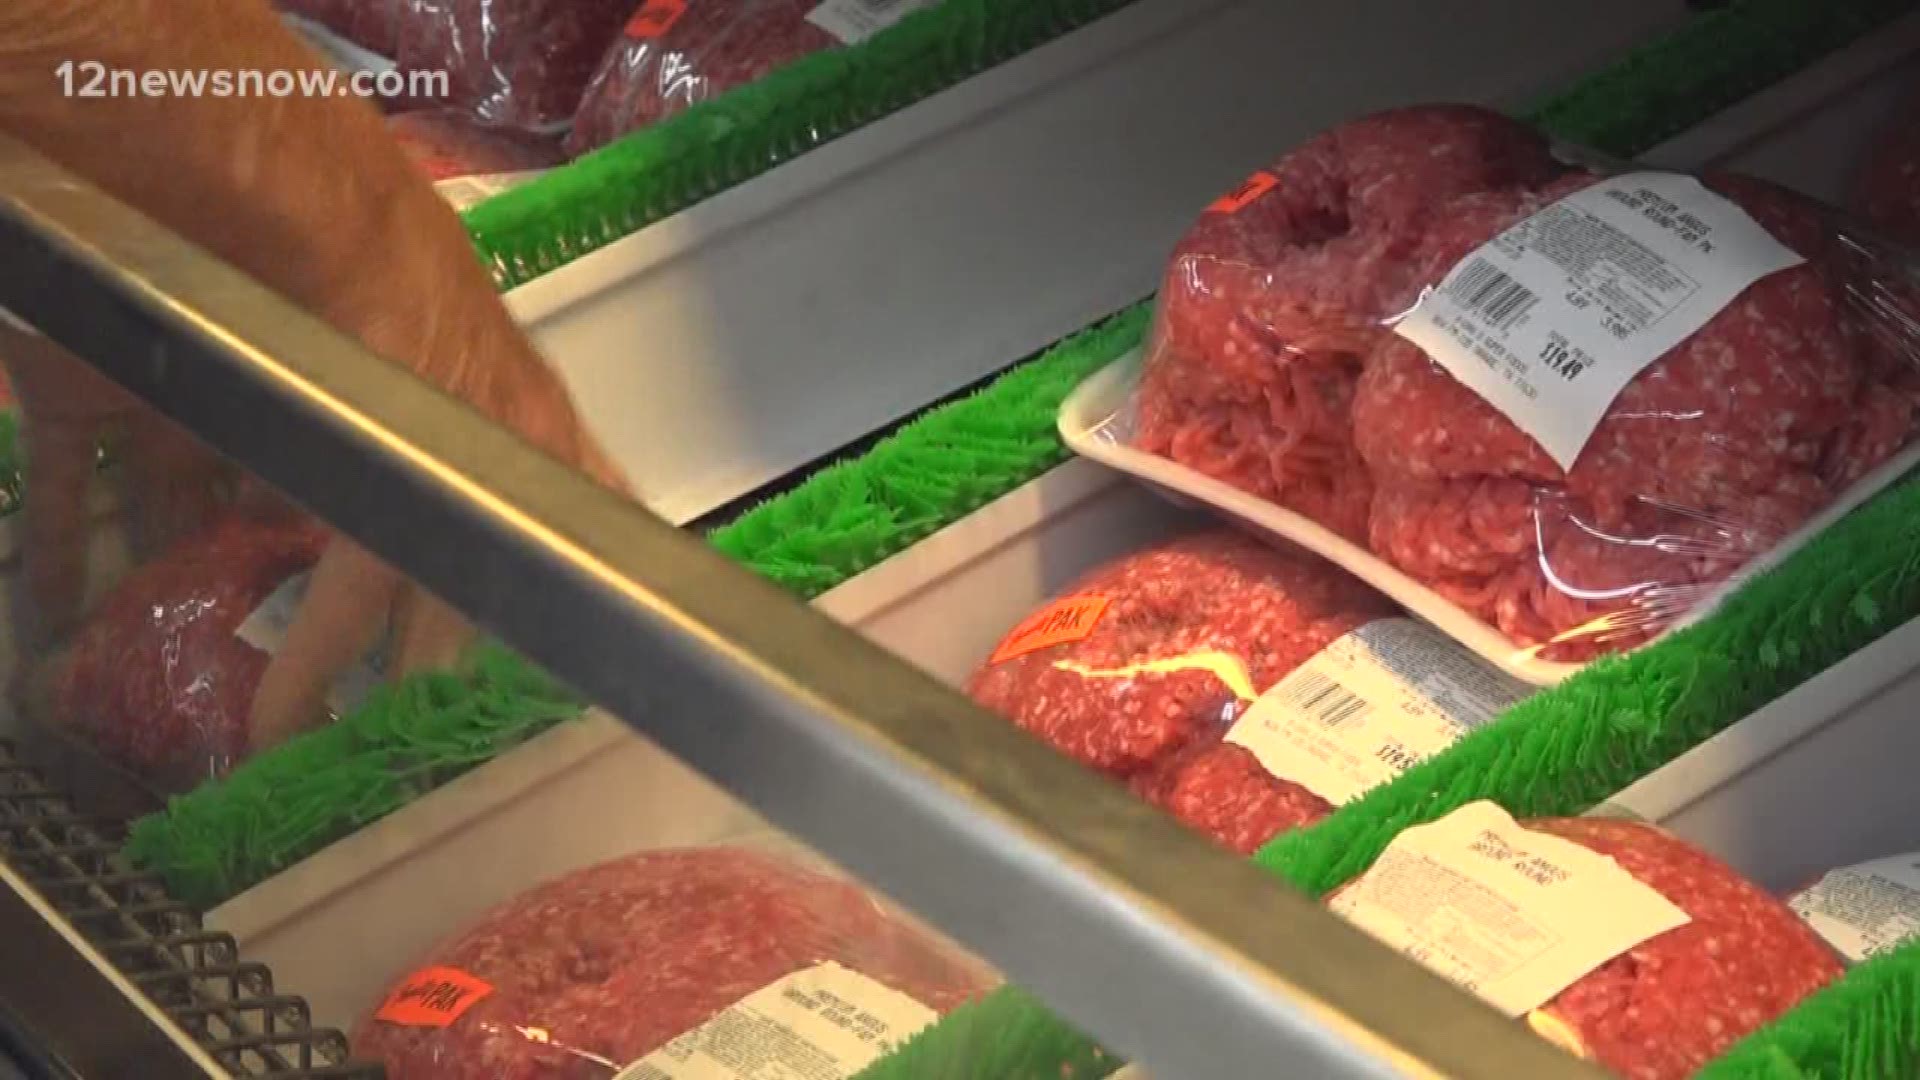 Although the shortage is starting to cause an uptick in prices, K-Dan's shelves are still stocked with meat. Just a few items are harder to come by